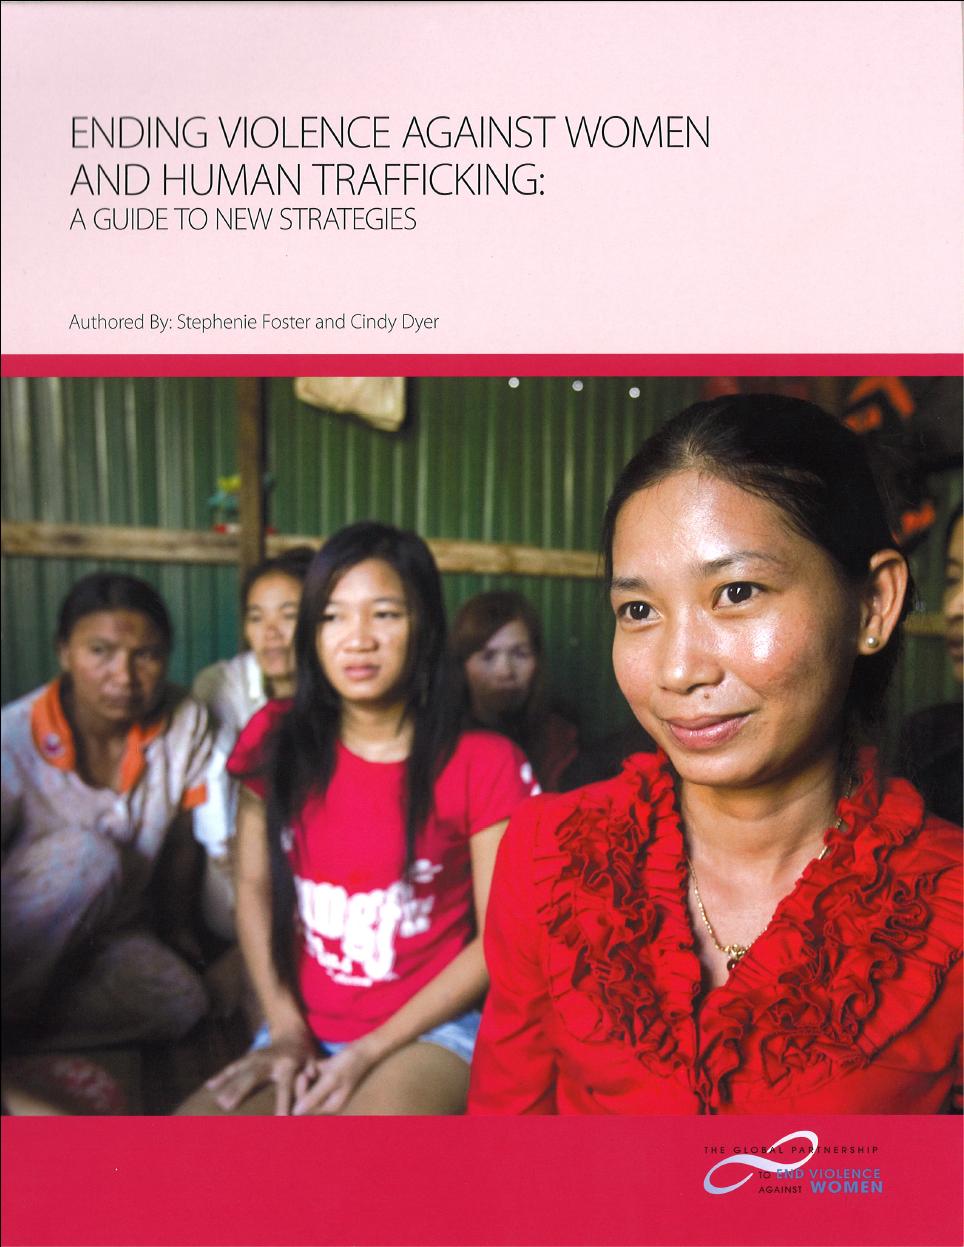 Ending Violence Against Women and Human Trafficking: A Guide to New Strategies